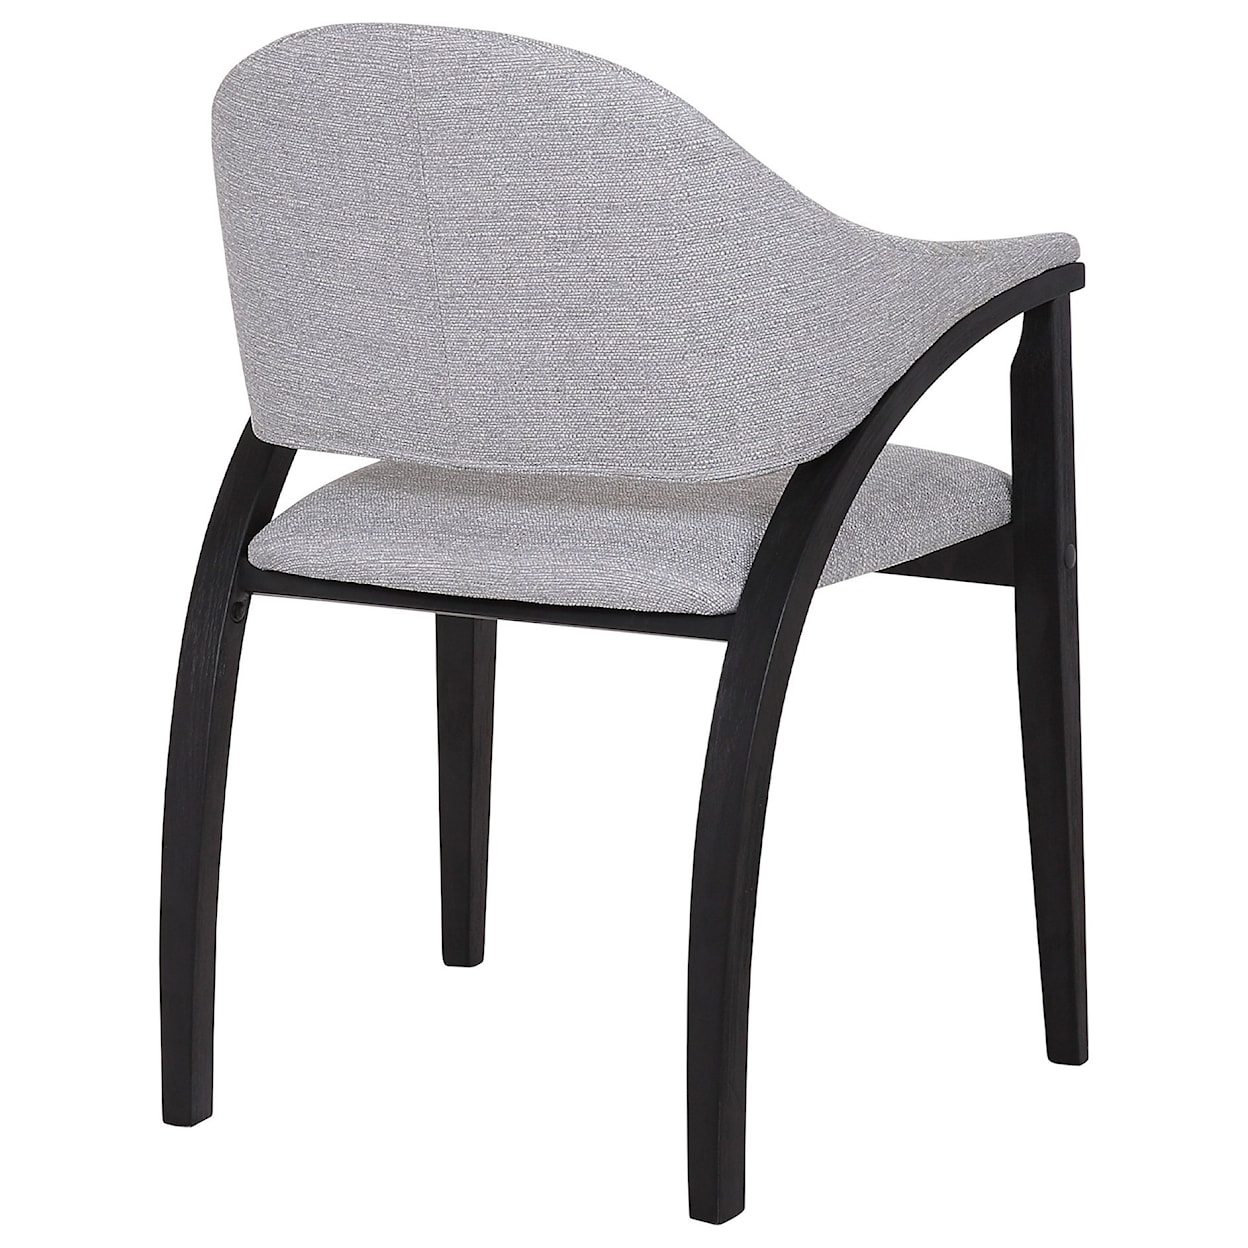 Armen Living Meadow Contemporary Dining Chair - Set of 2